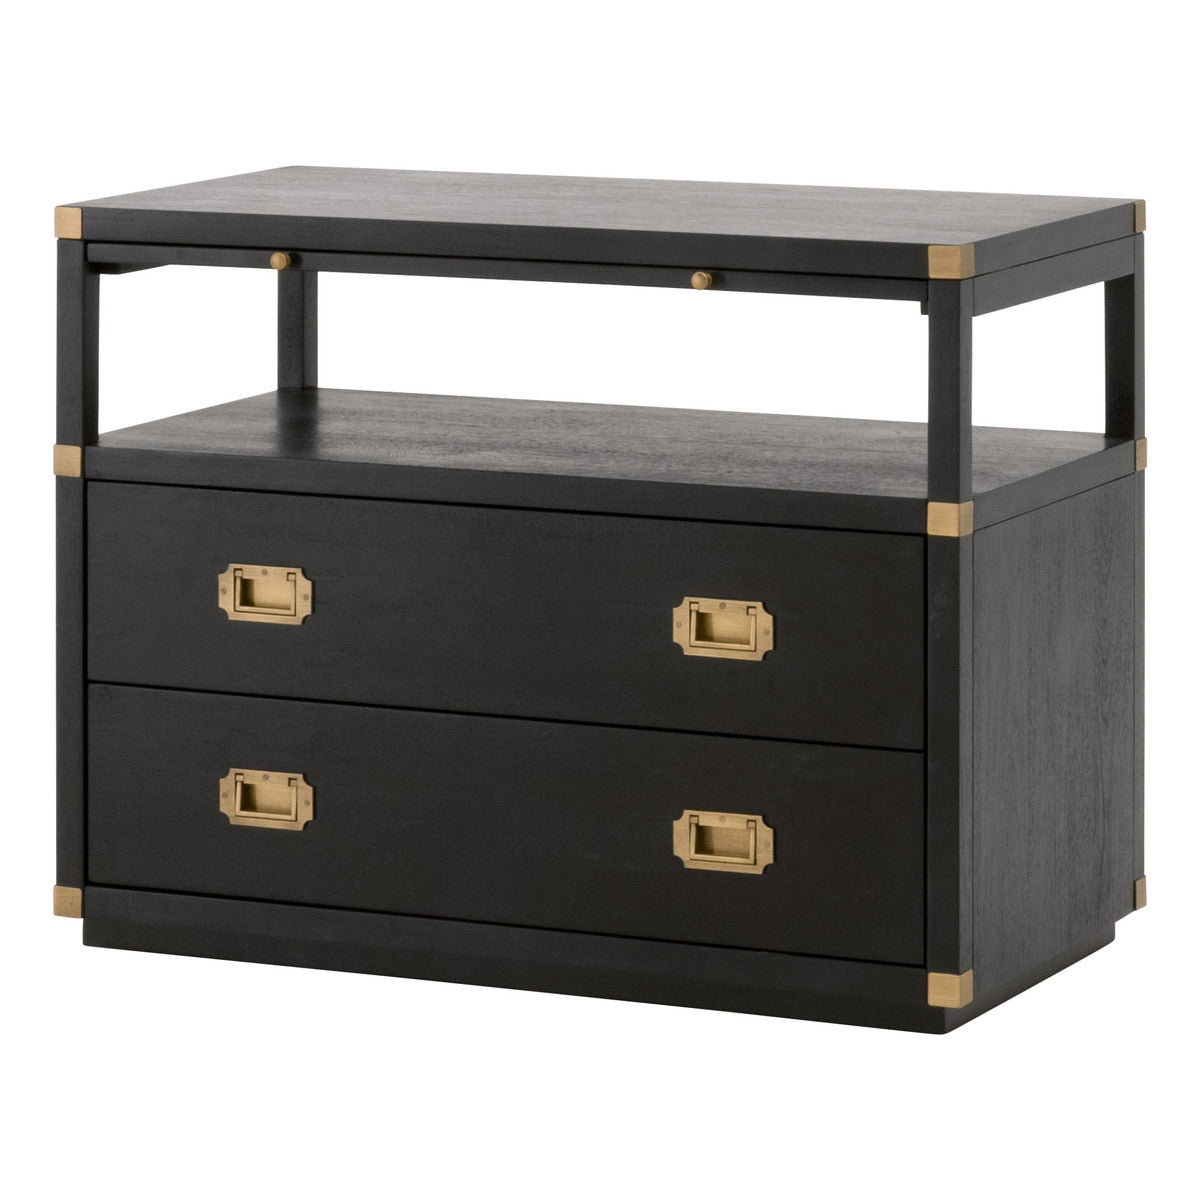 Essentials For Living Nightstands & Side Tables - Bradley 2-Drawer Nightstand